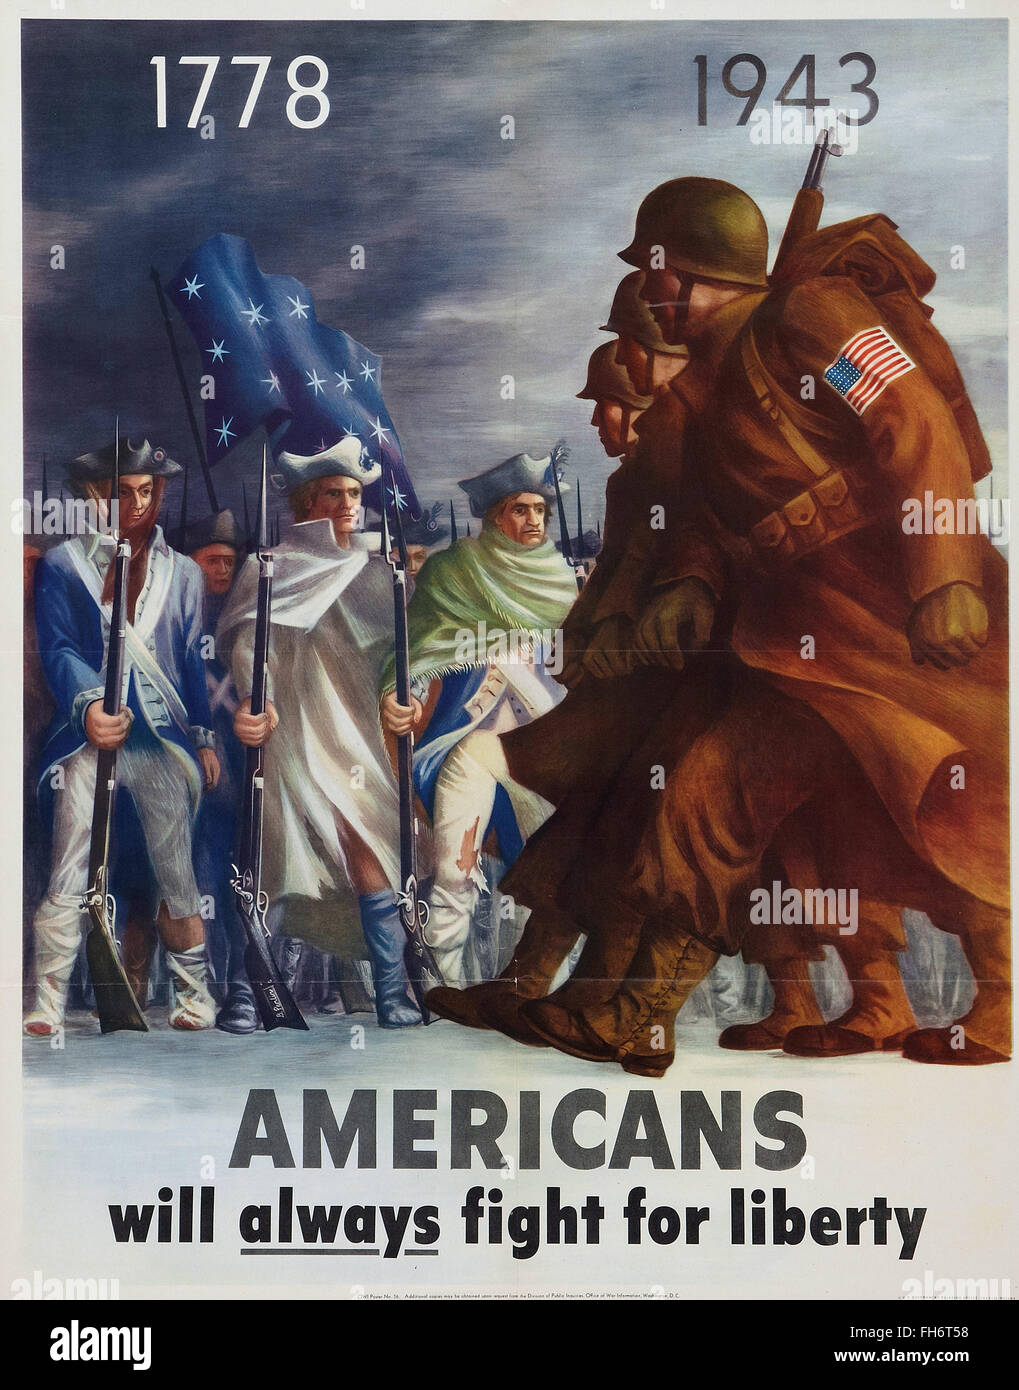 1778 - 1943 - Americans Will Always Fight For Liberty - US Propaganda Poster - WWII Stock Photo